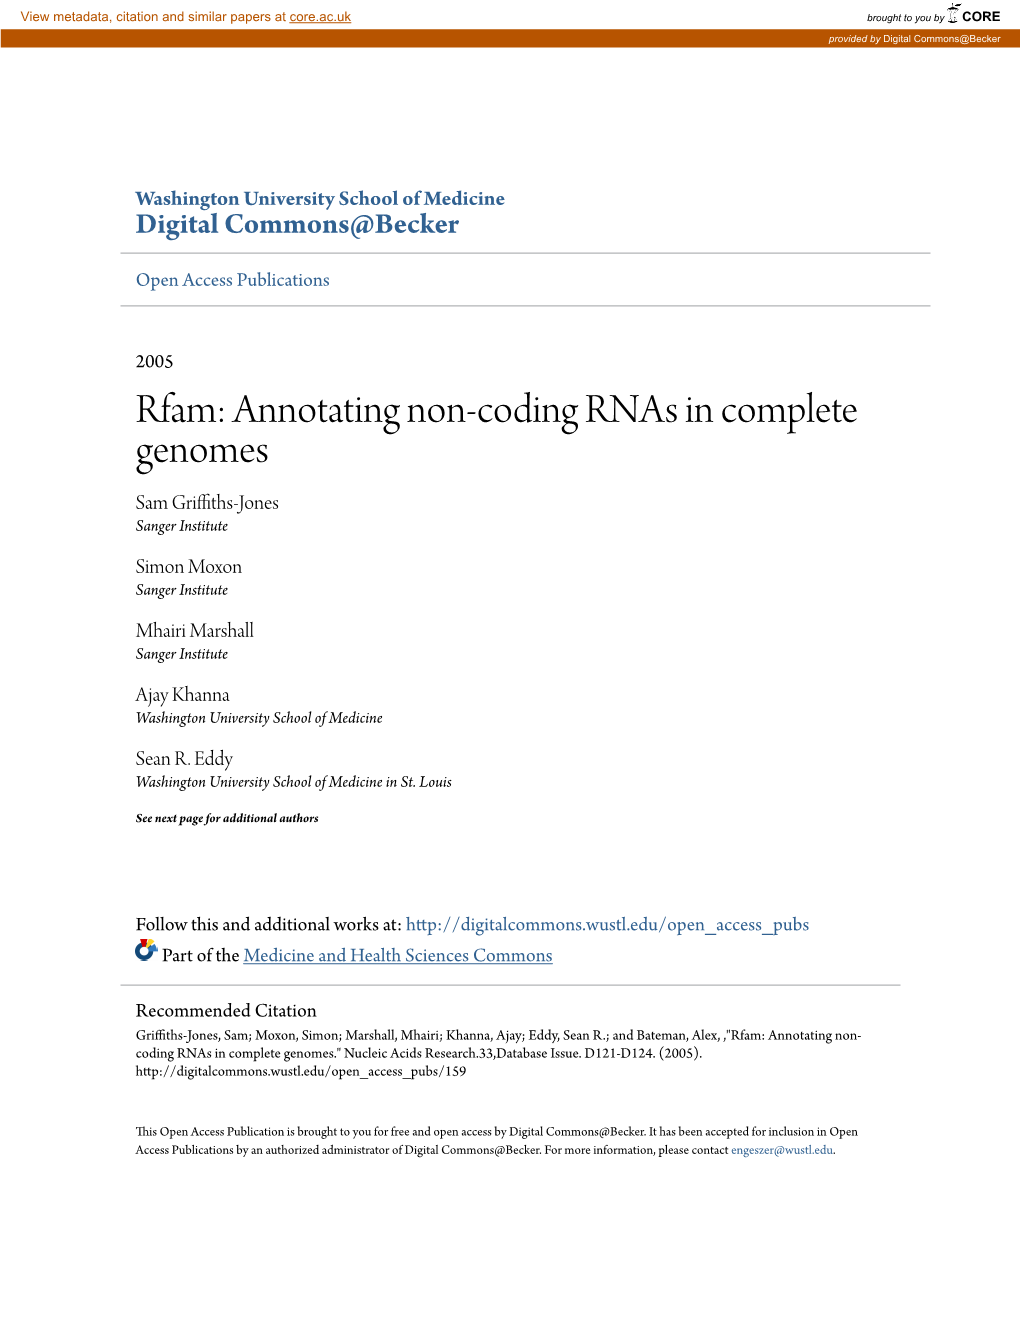 Rfam: Annotating Non-Coding Rnas in Complete Genomes Sam Griffiths-Jones Sanger Institute